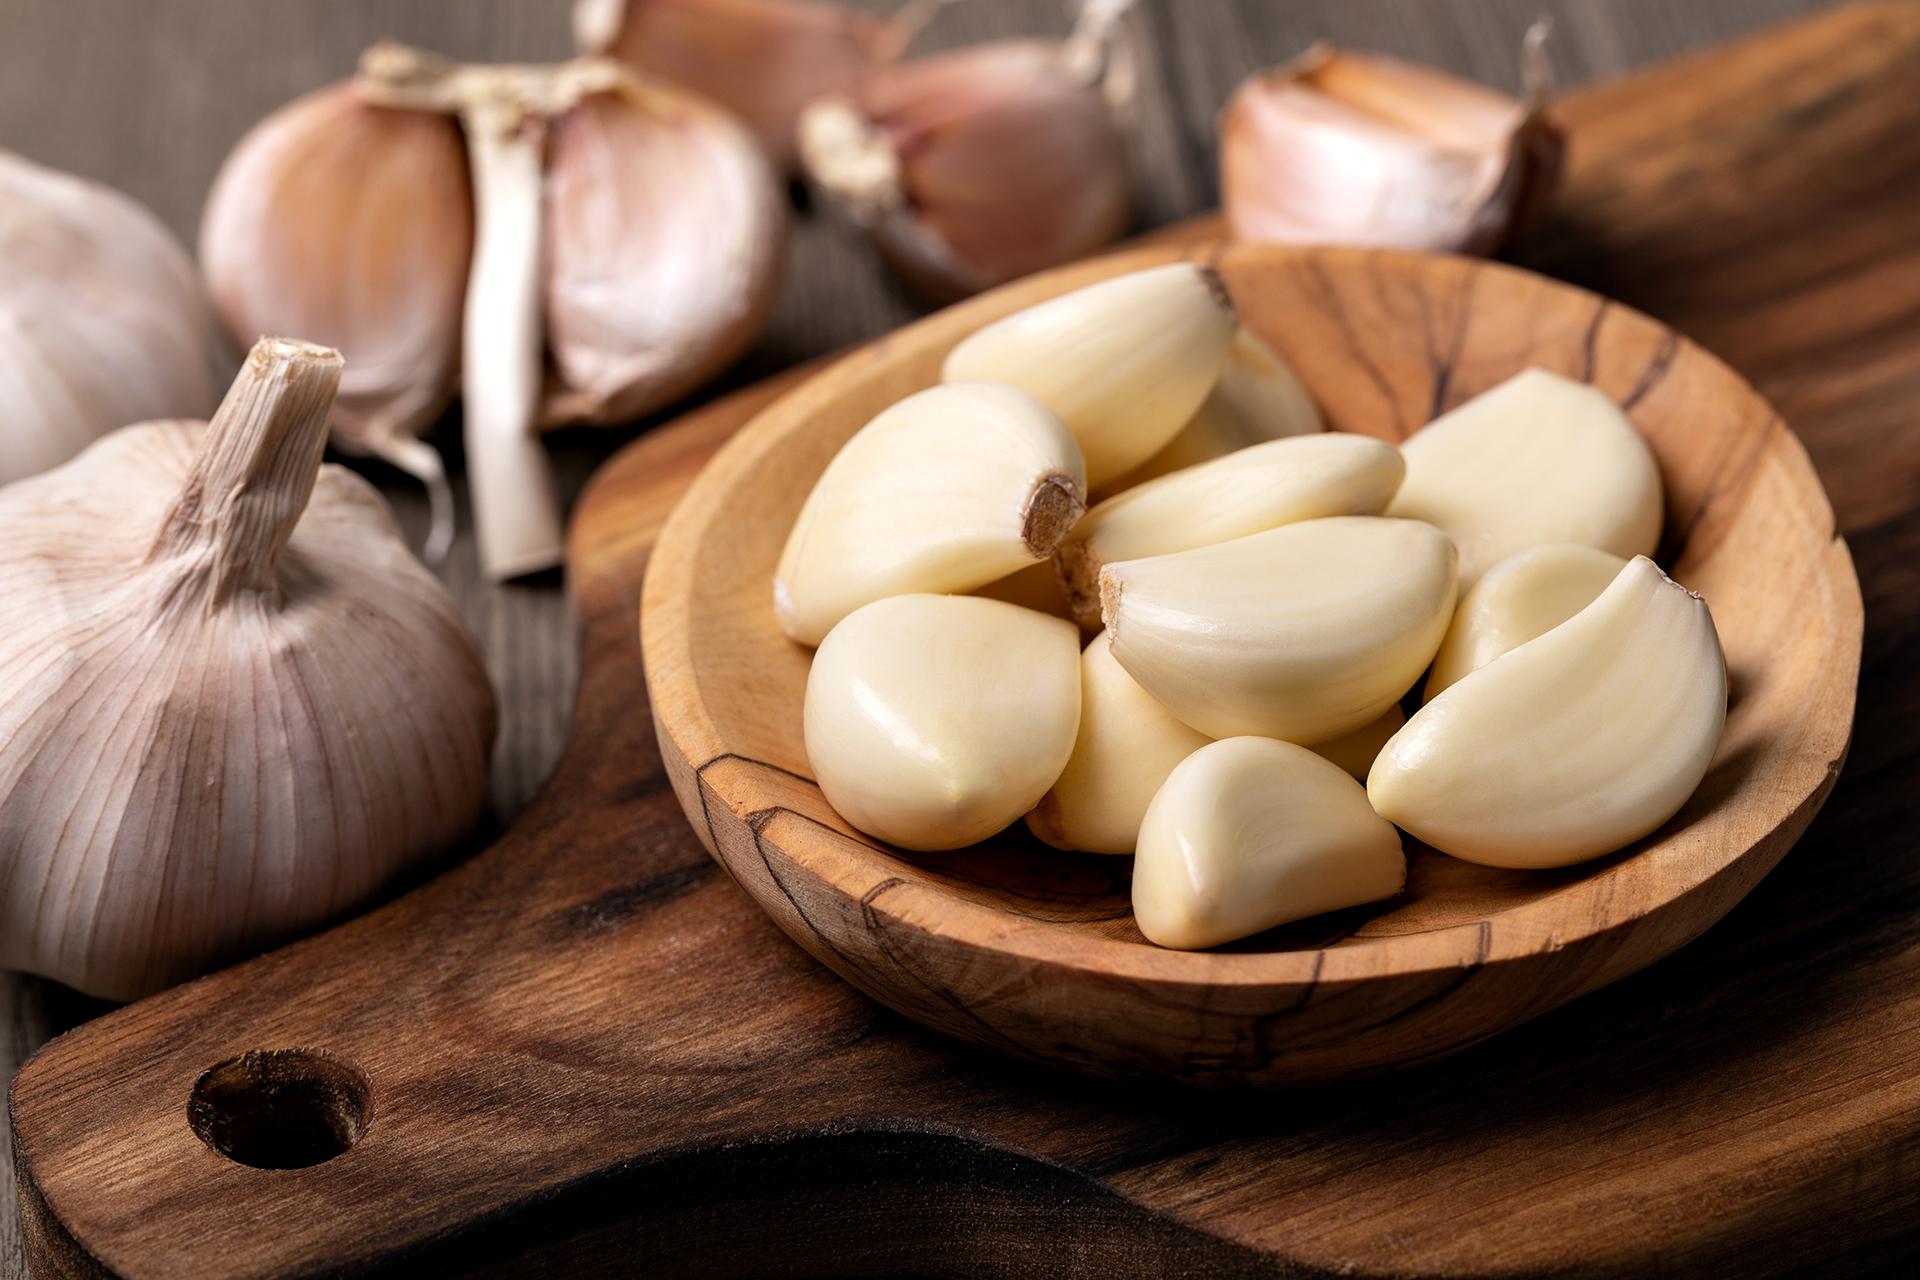 How Garlic Boosts Immunity: Here Are the 4 Things to Remember